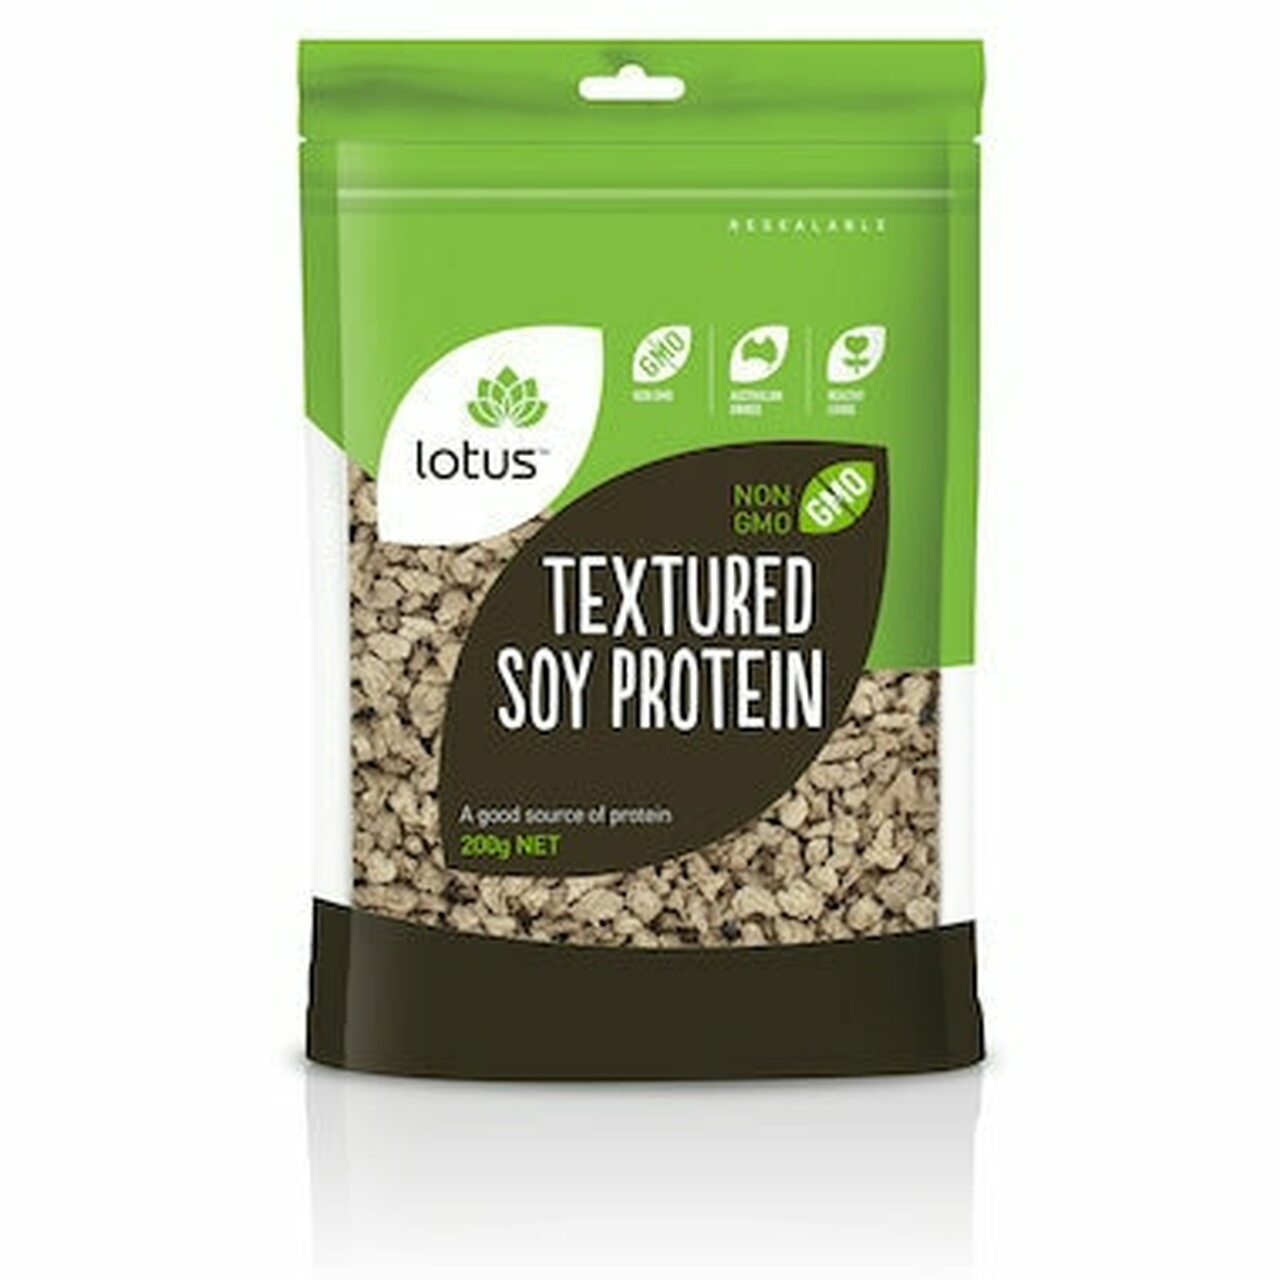 Lotus - Textured Soy Protein